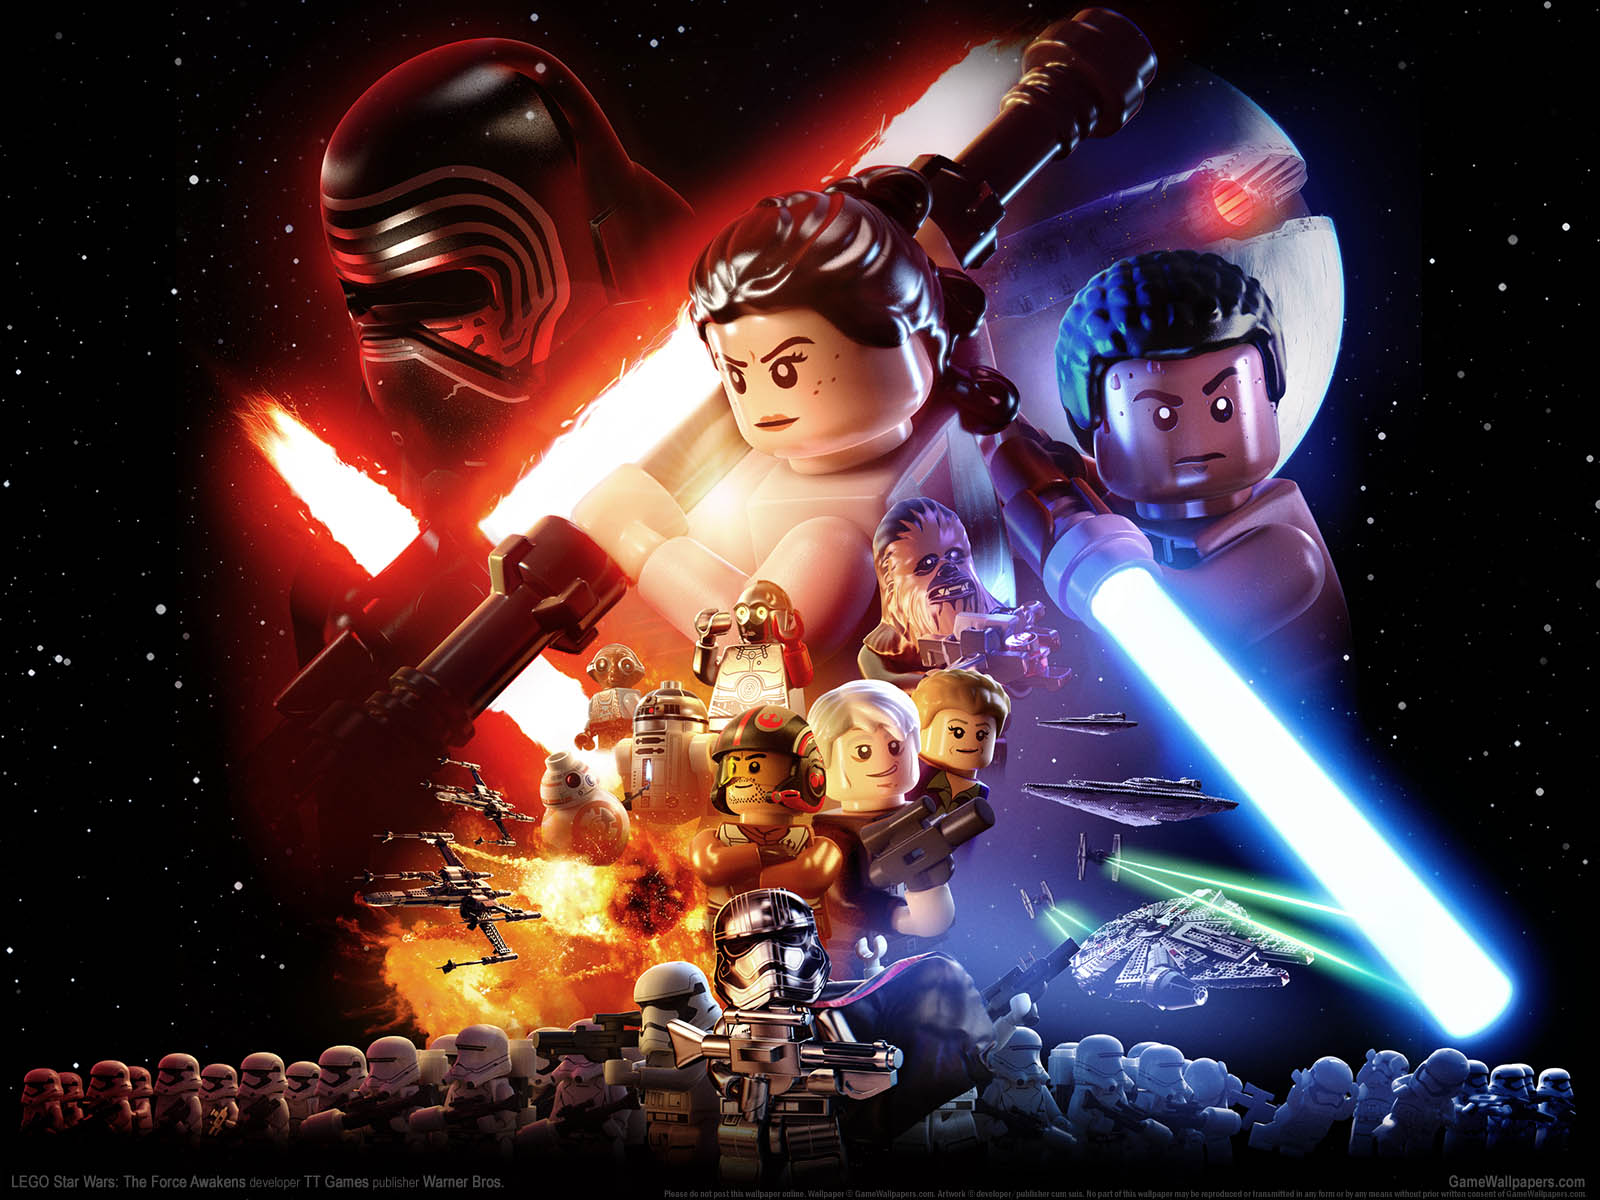 LEGO Star Wars%3A The Force Awakens achtergrond 01 1600x1200